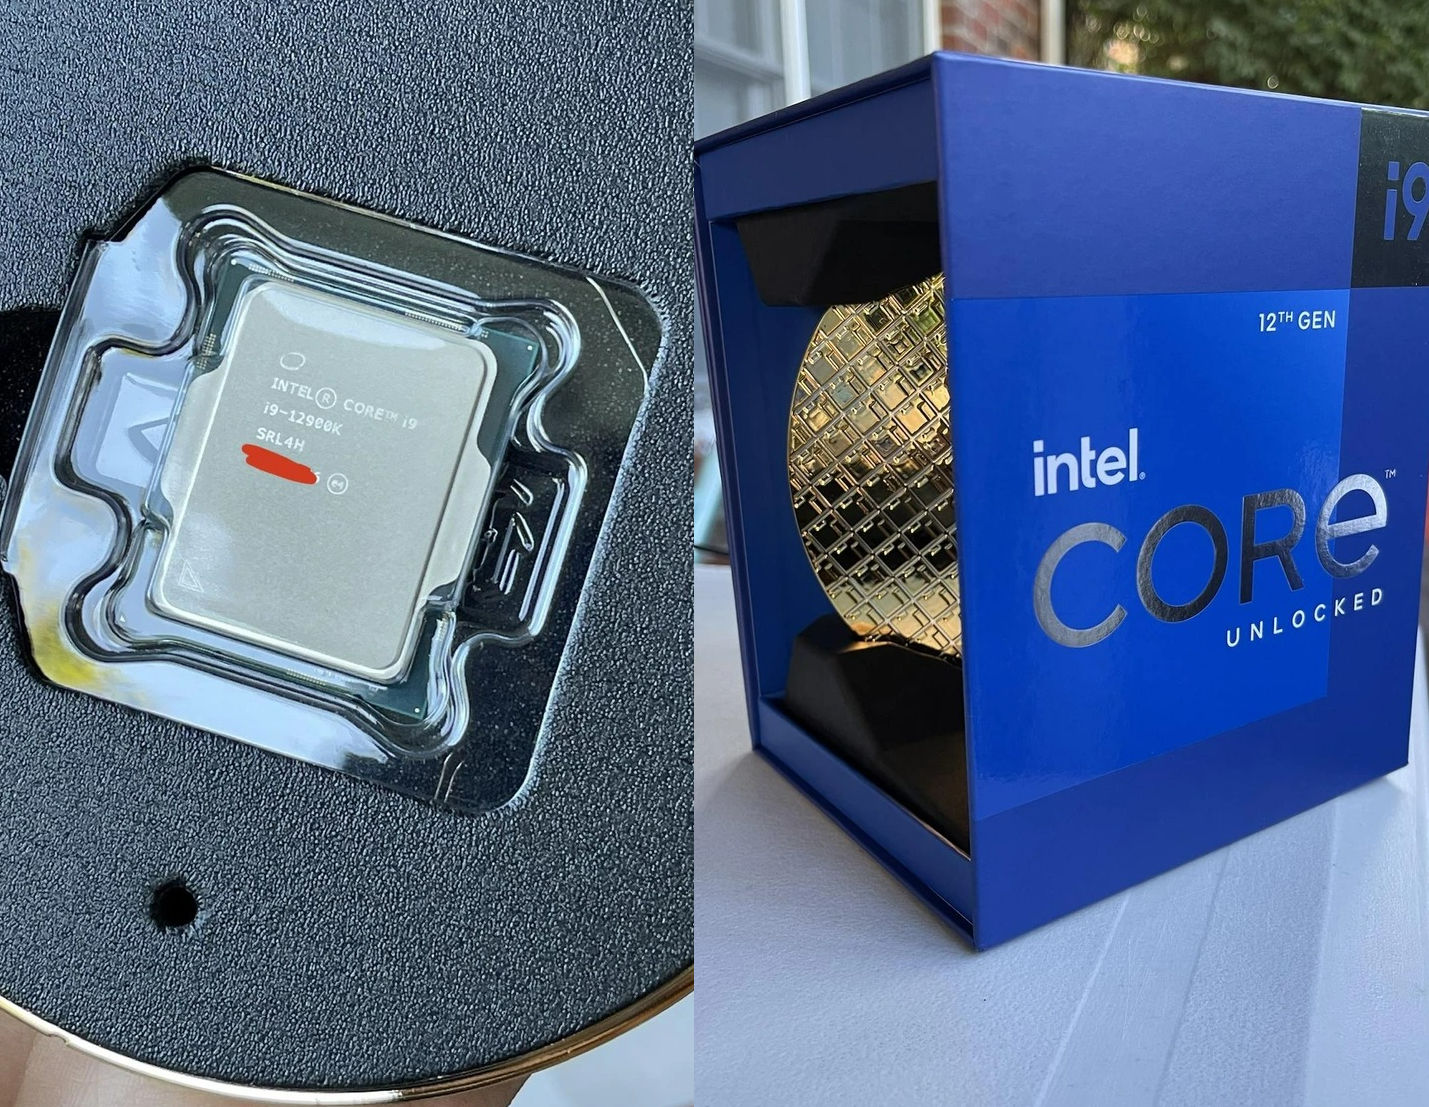 Intel Core i9-12900K already shipping to first customers two weeks